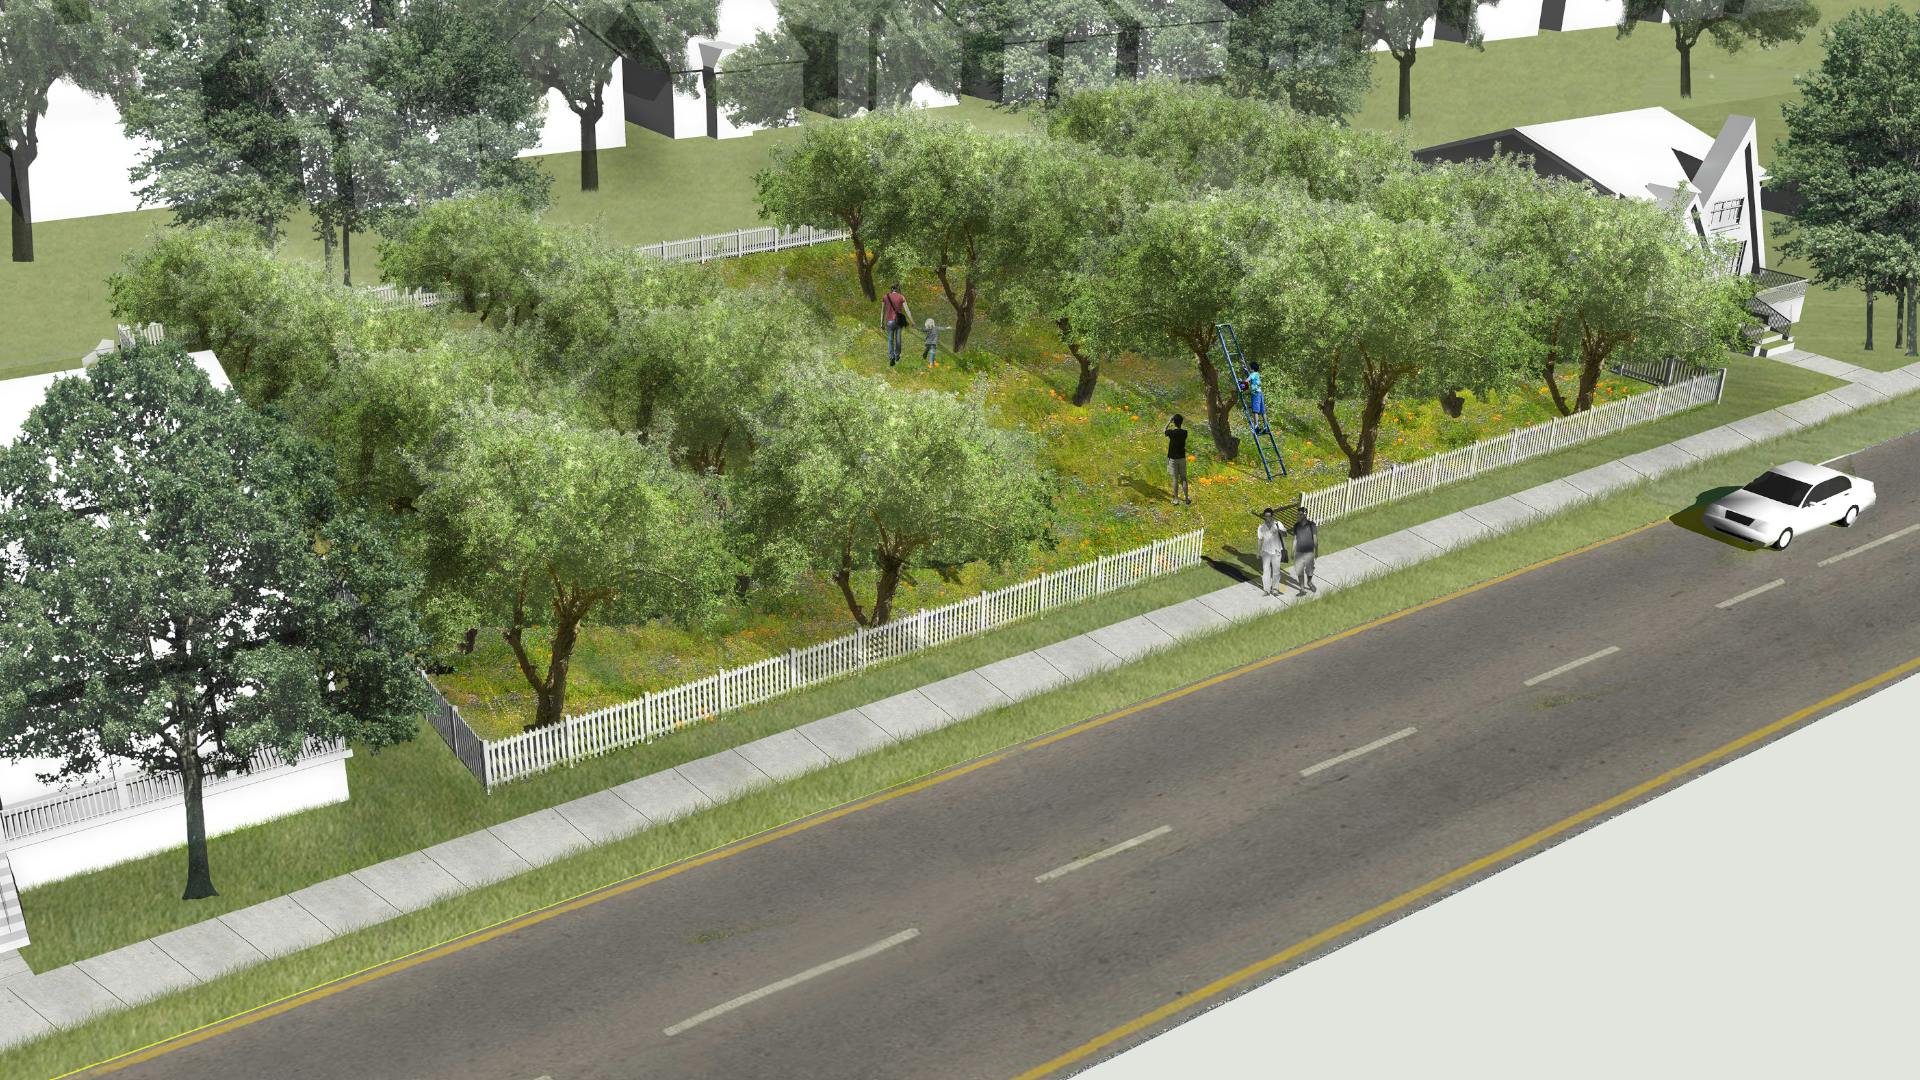 Perspective rendering of a vacant lot transformed into a community orchard.